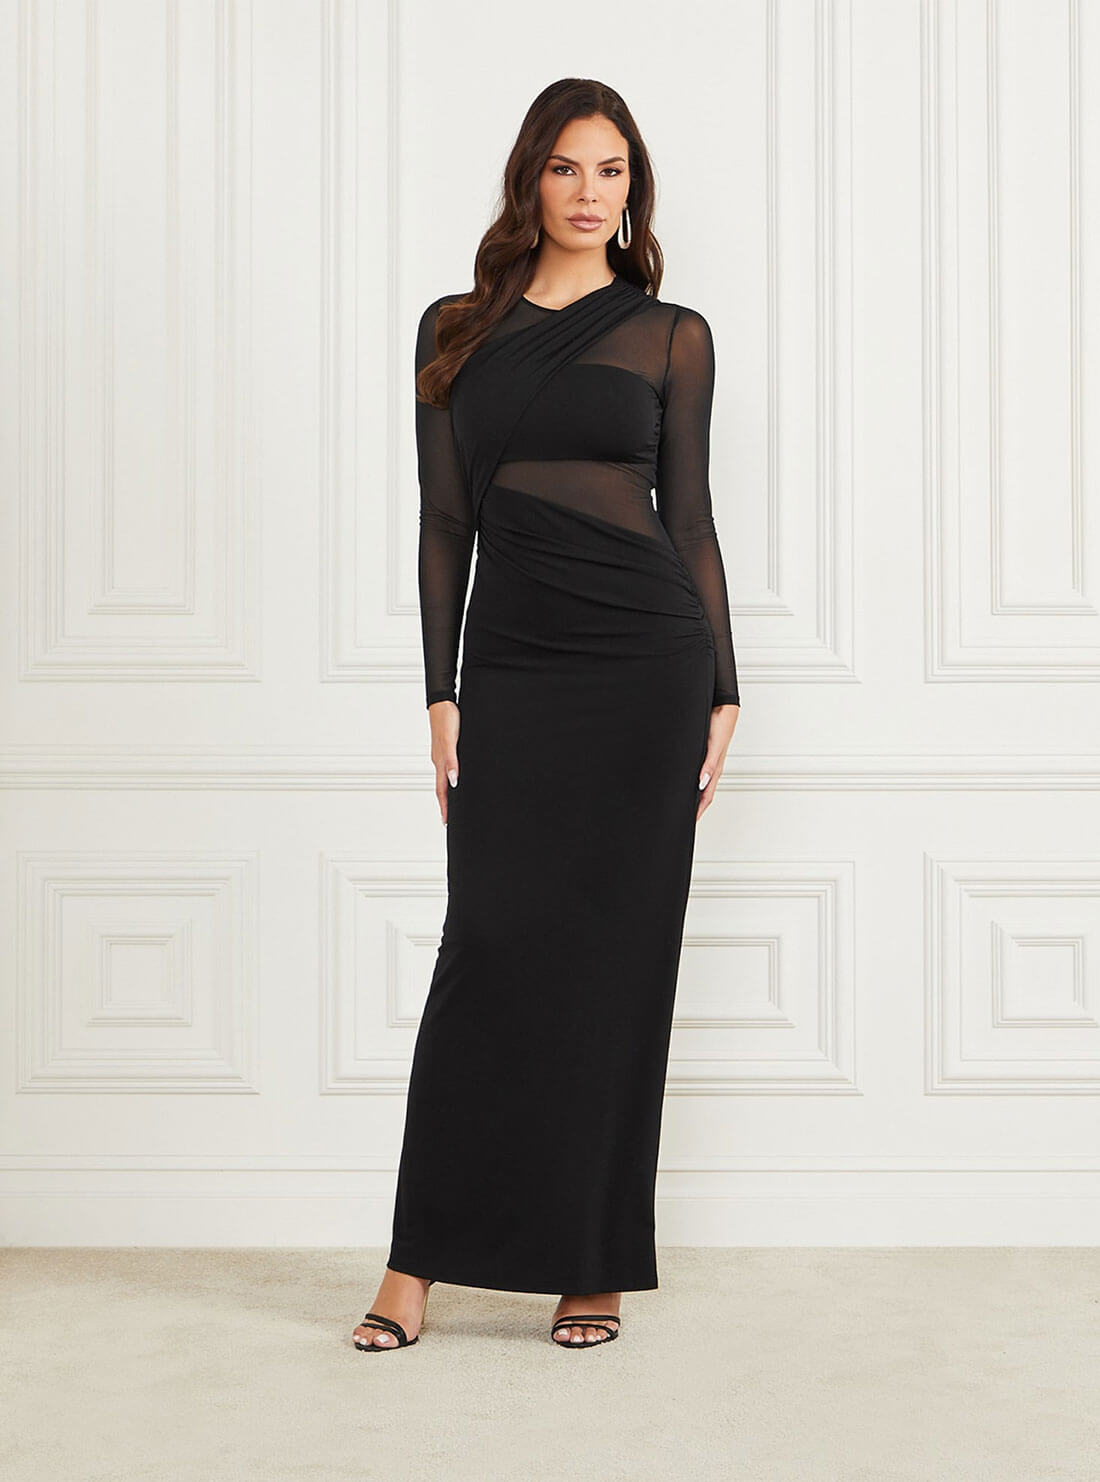 Marciano Black Starstruck Gown | GUESS Women's | Front view